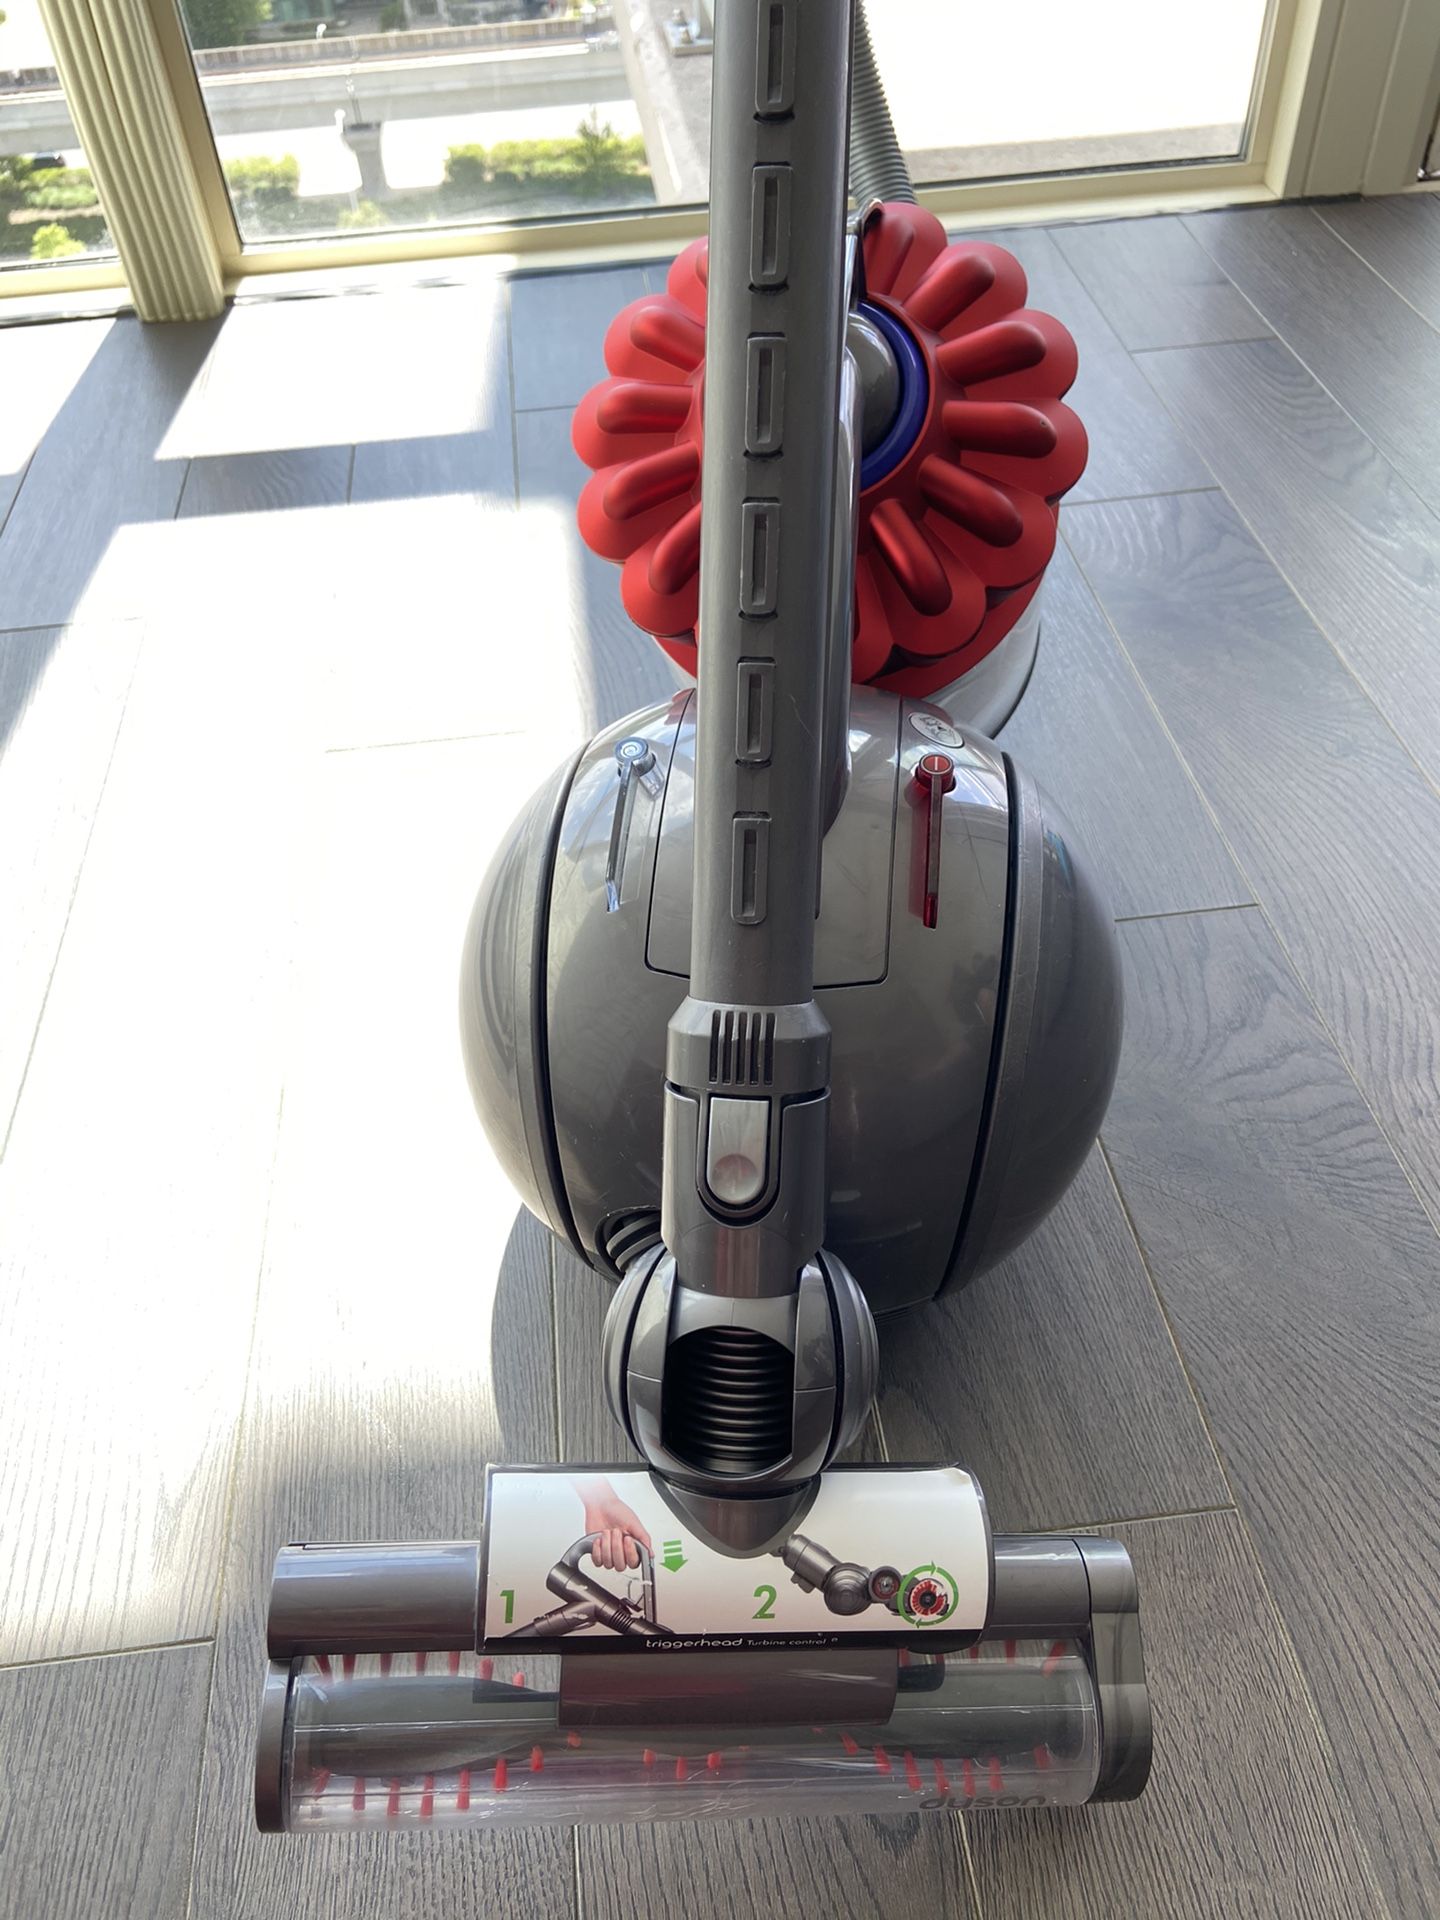 Dyson Dc39 Vacuum Cleaner like new with 20 months warranty